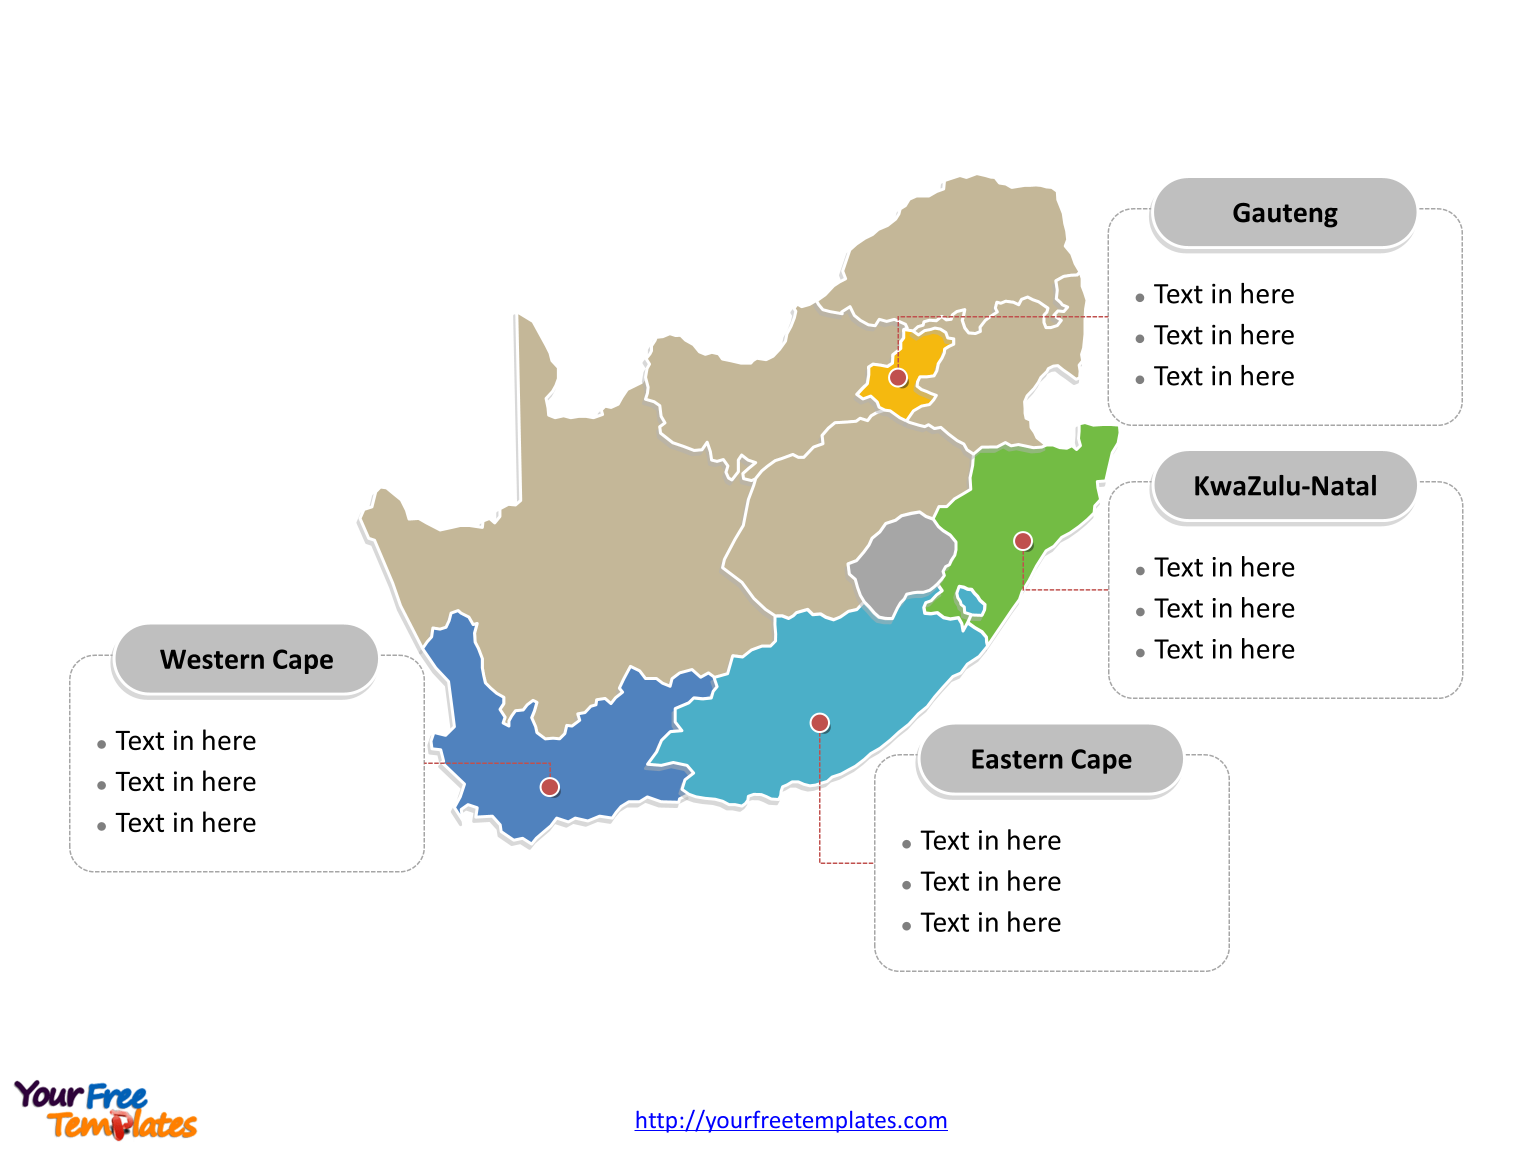 South Africa Editable map labeled with major provinces